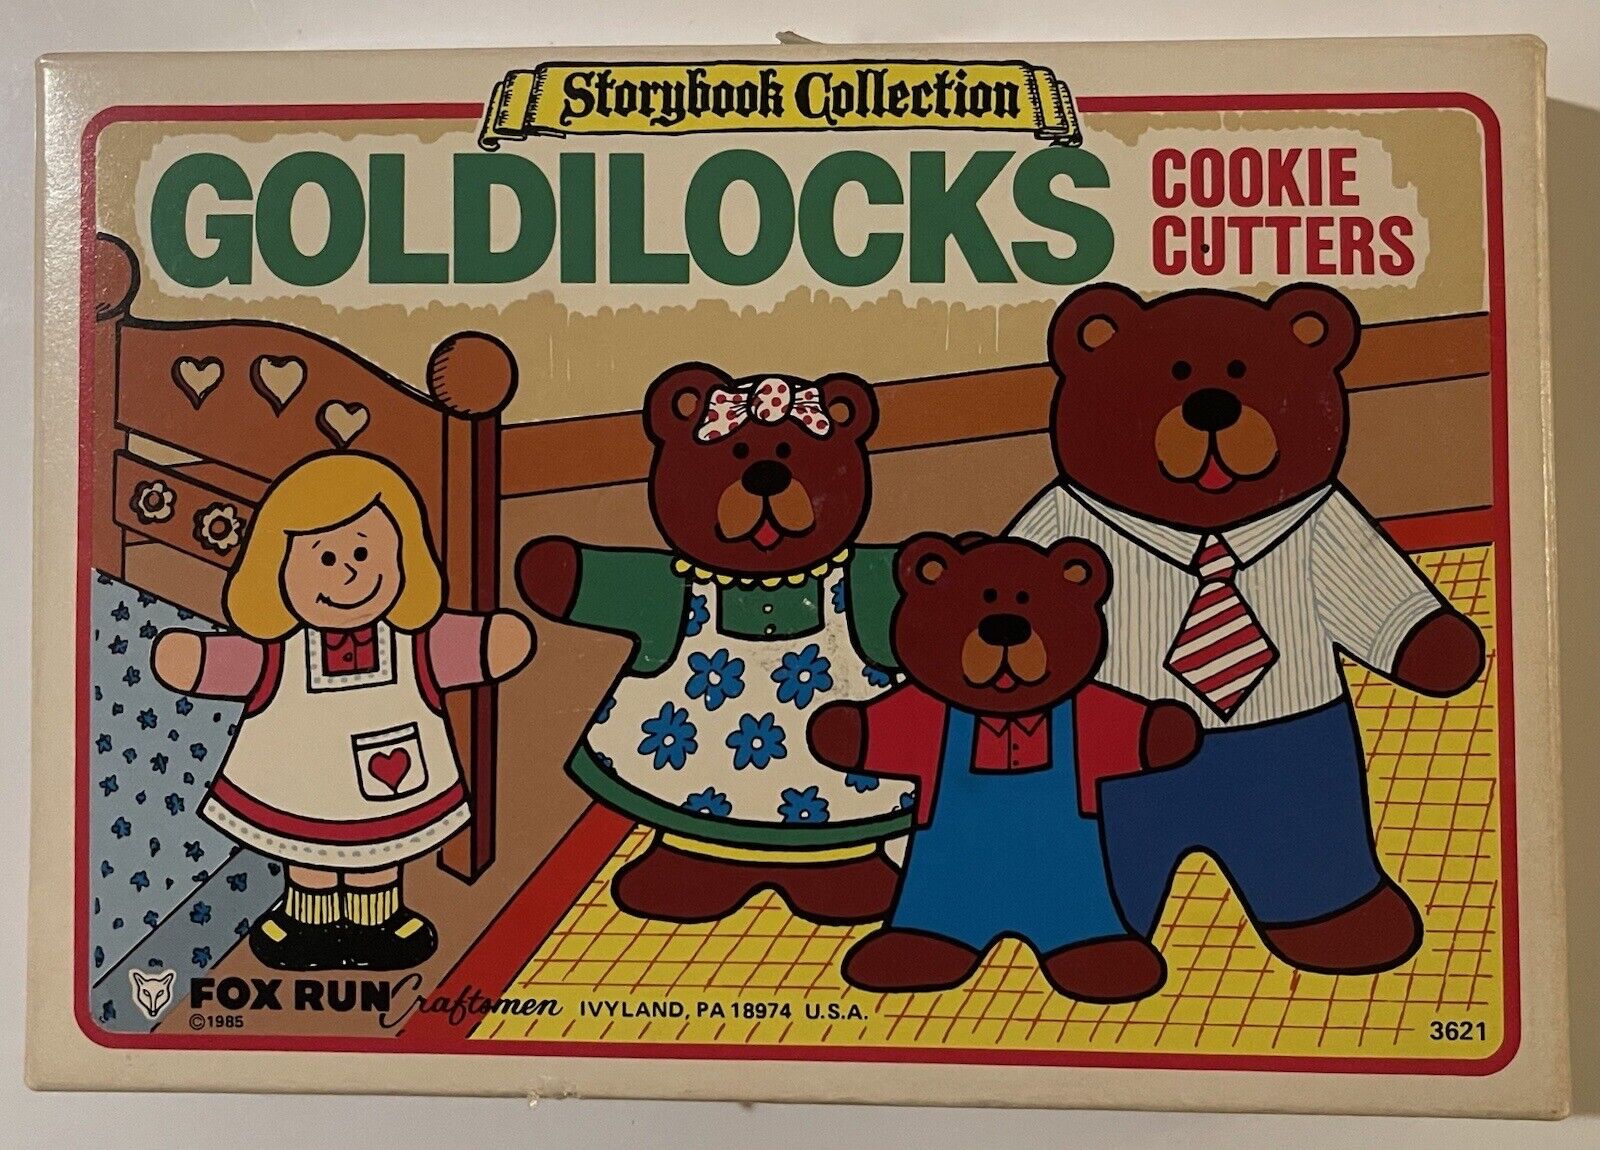 Vintage 1985 GOLDILOCKS Cookie Cutters Storybook Collection Set of (4) Fox Run